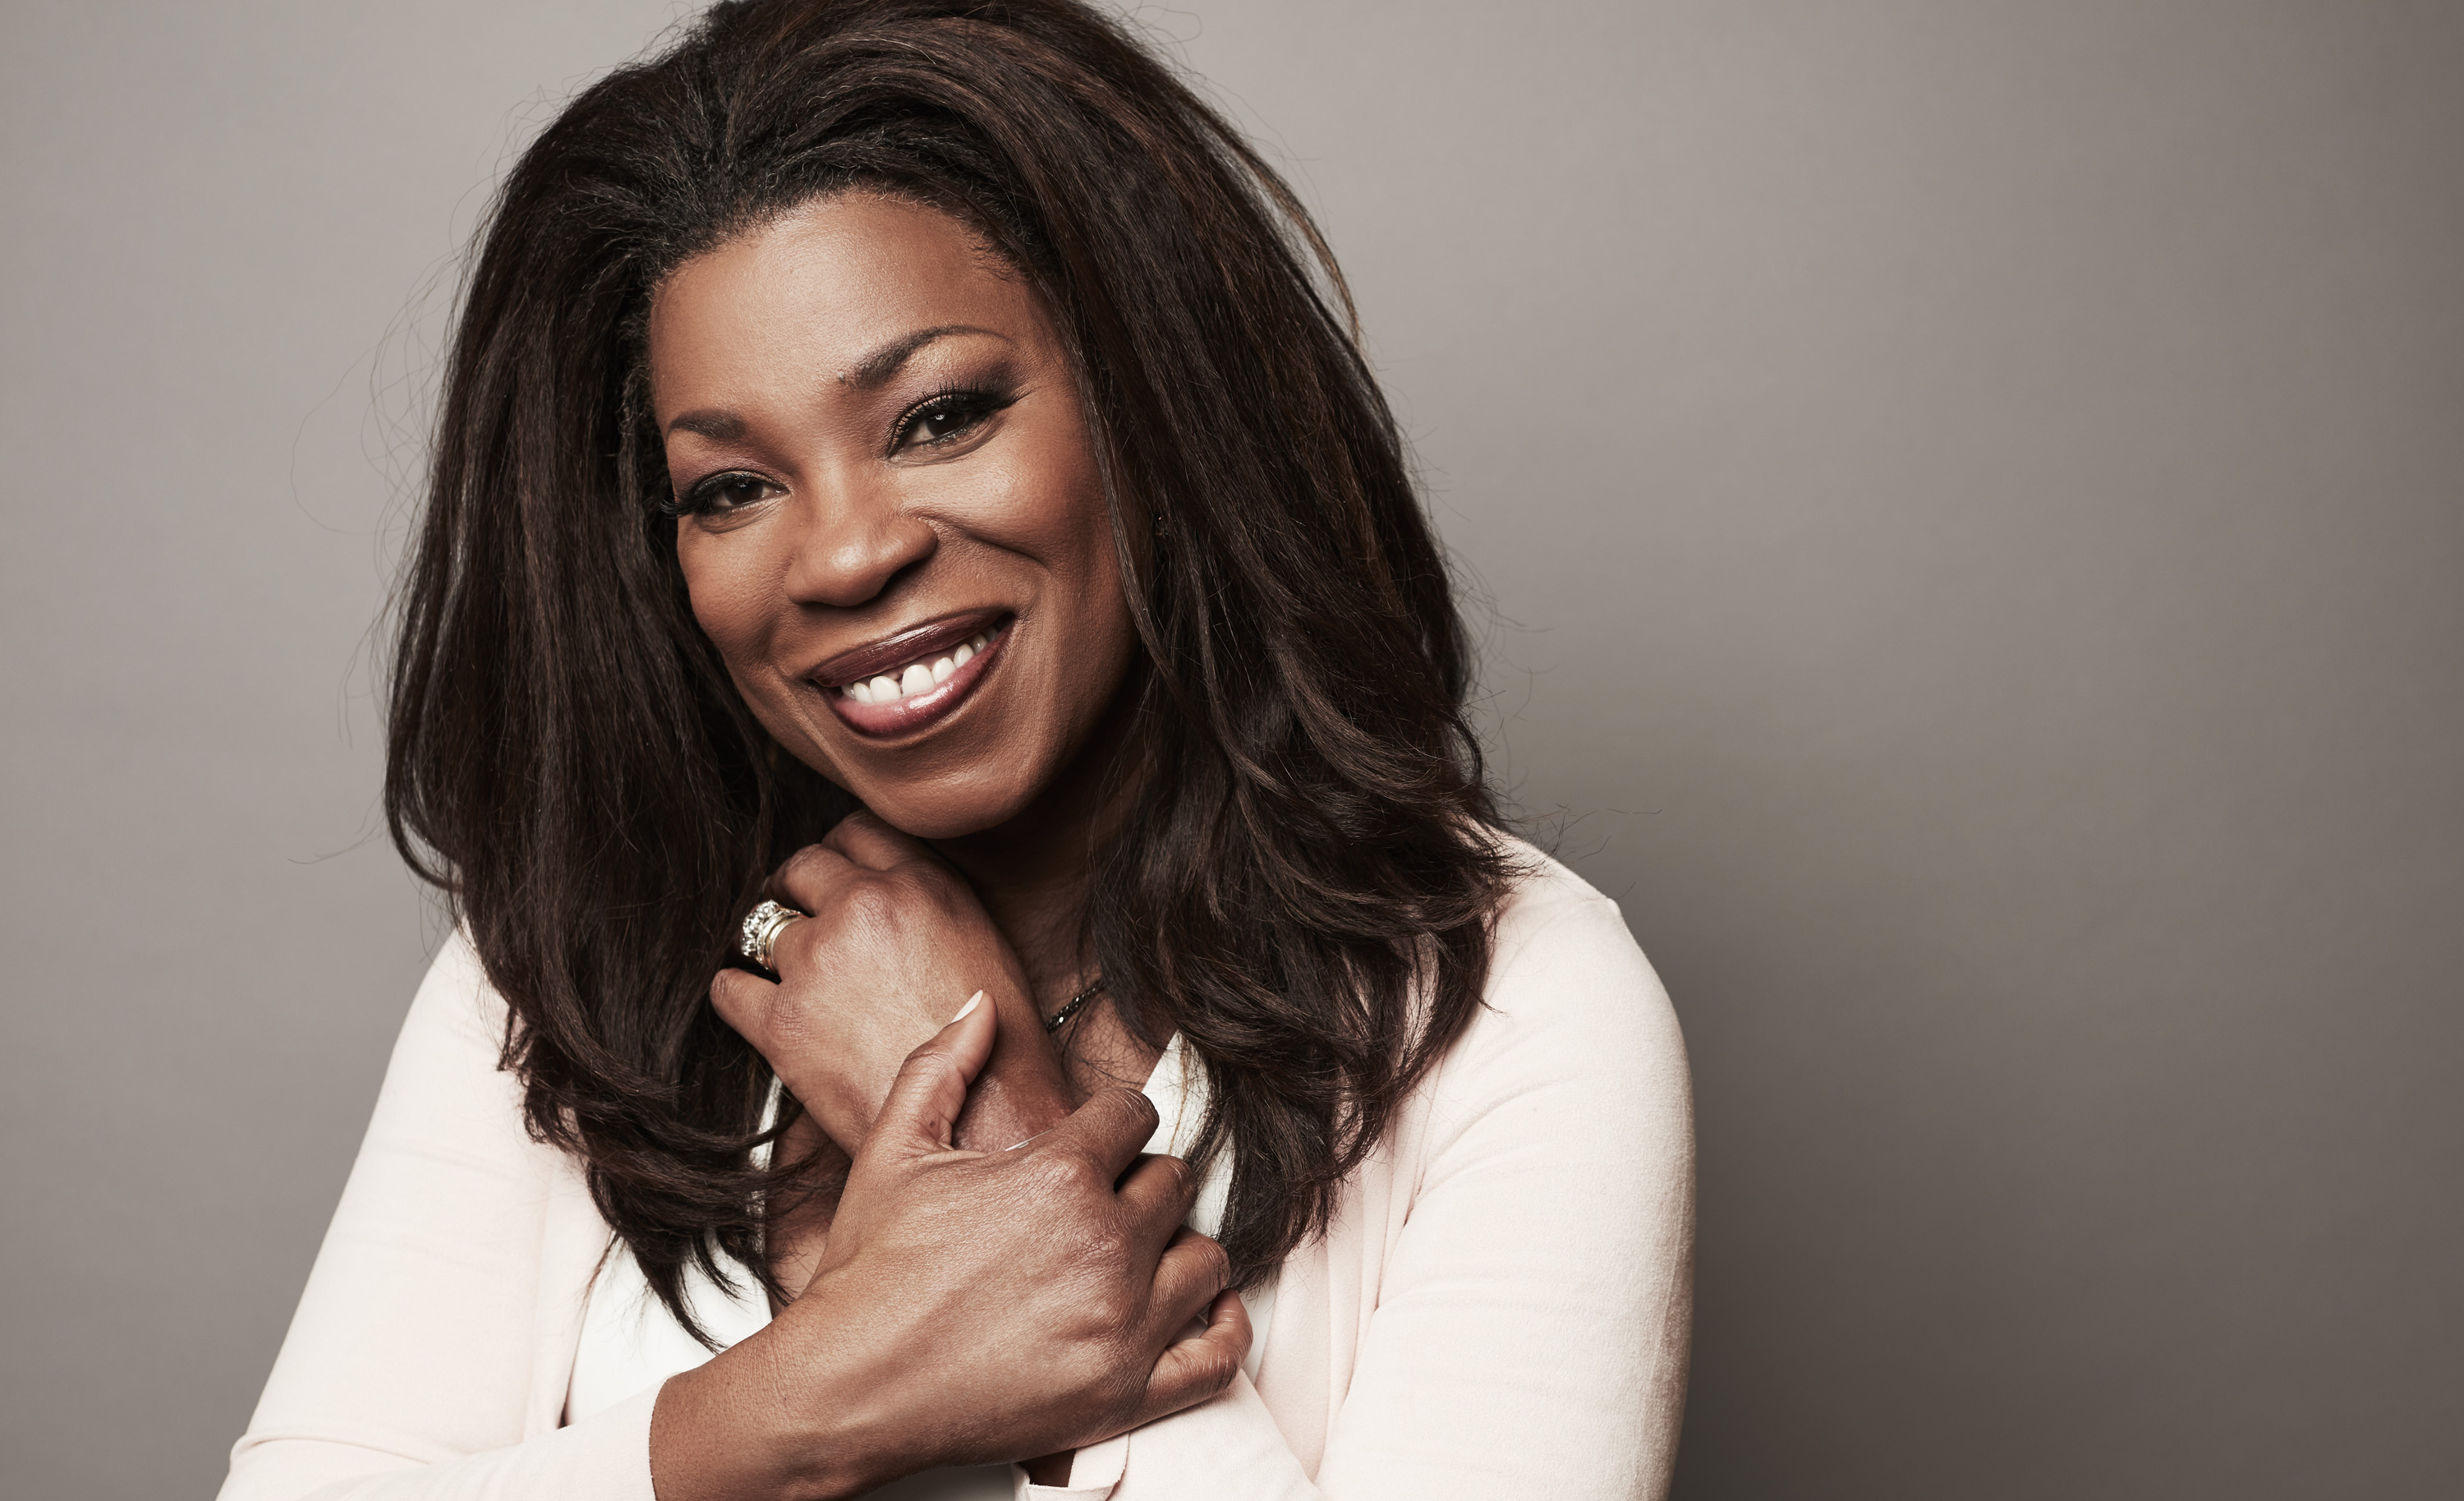 The Equalizer S Lorraine Toussaint On The Exciting Roles Being Made Available For Women Of